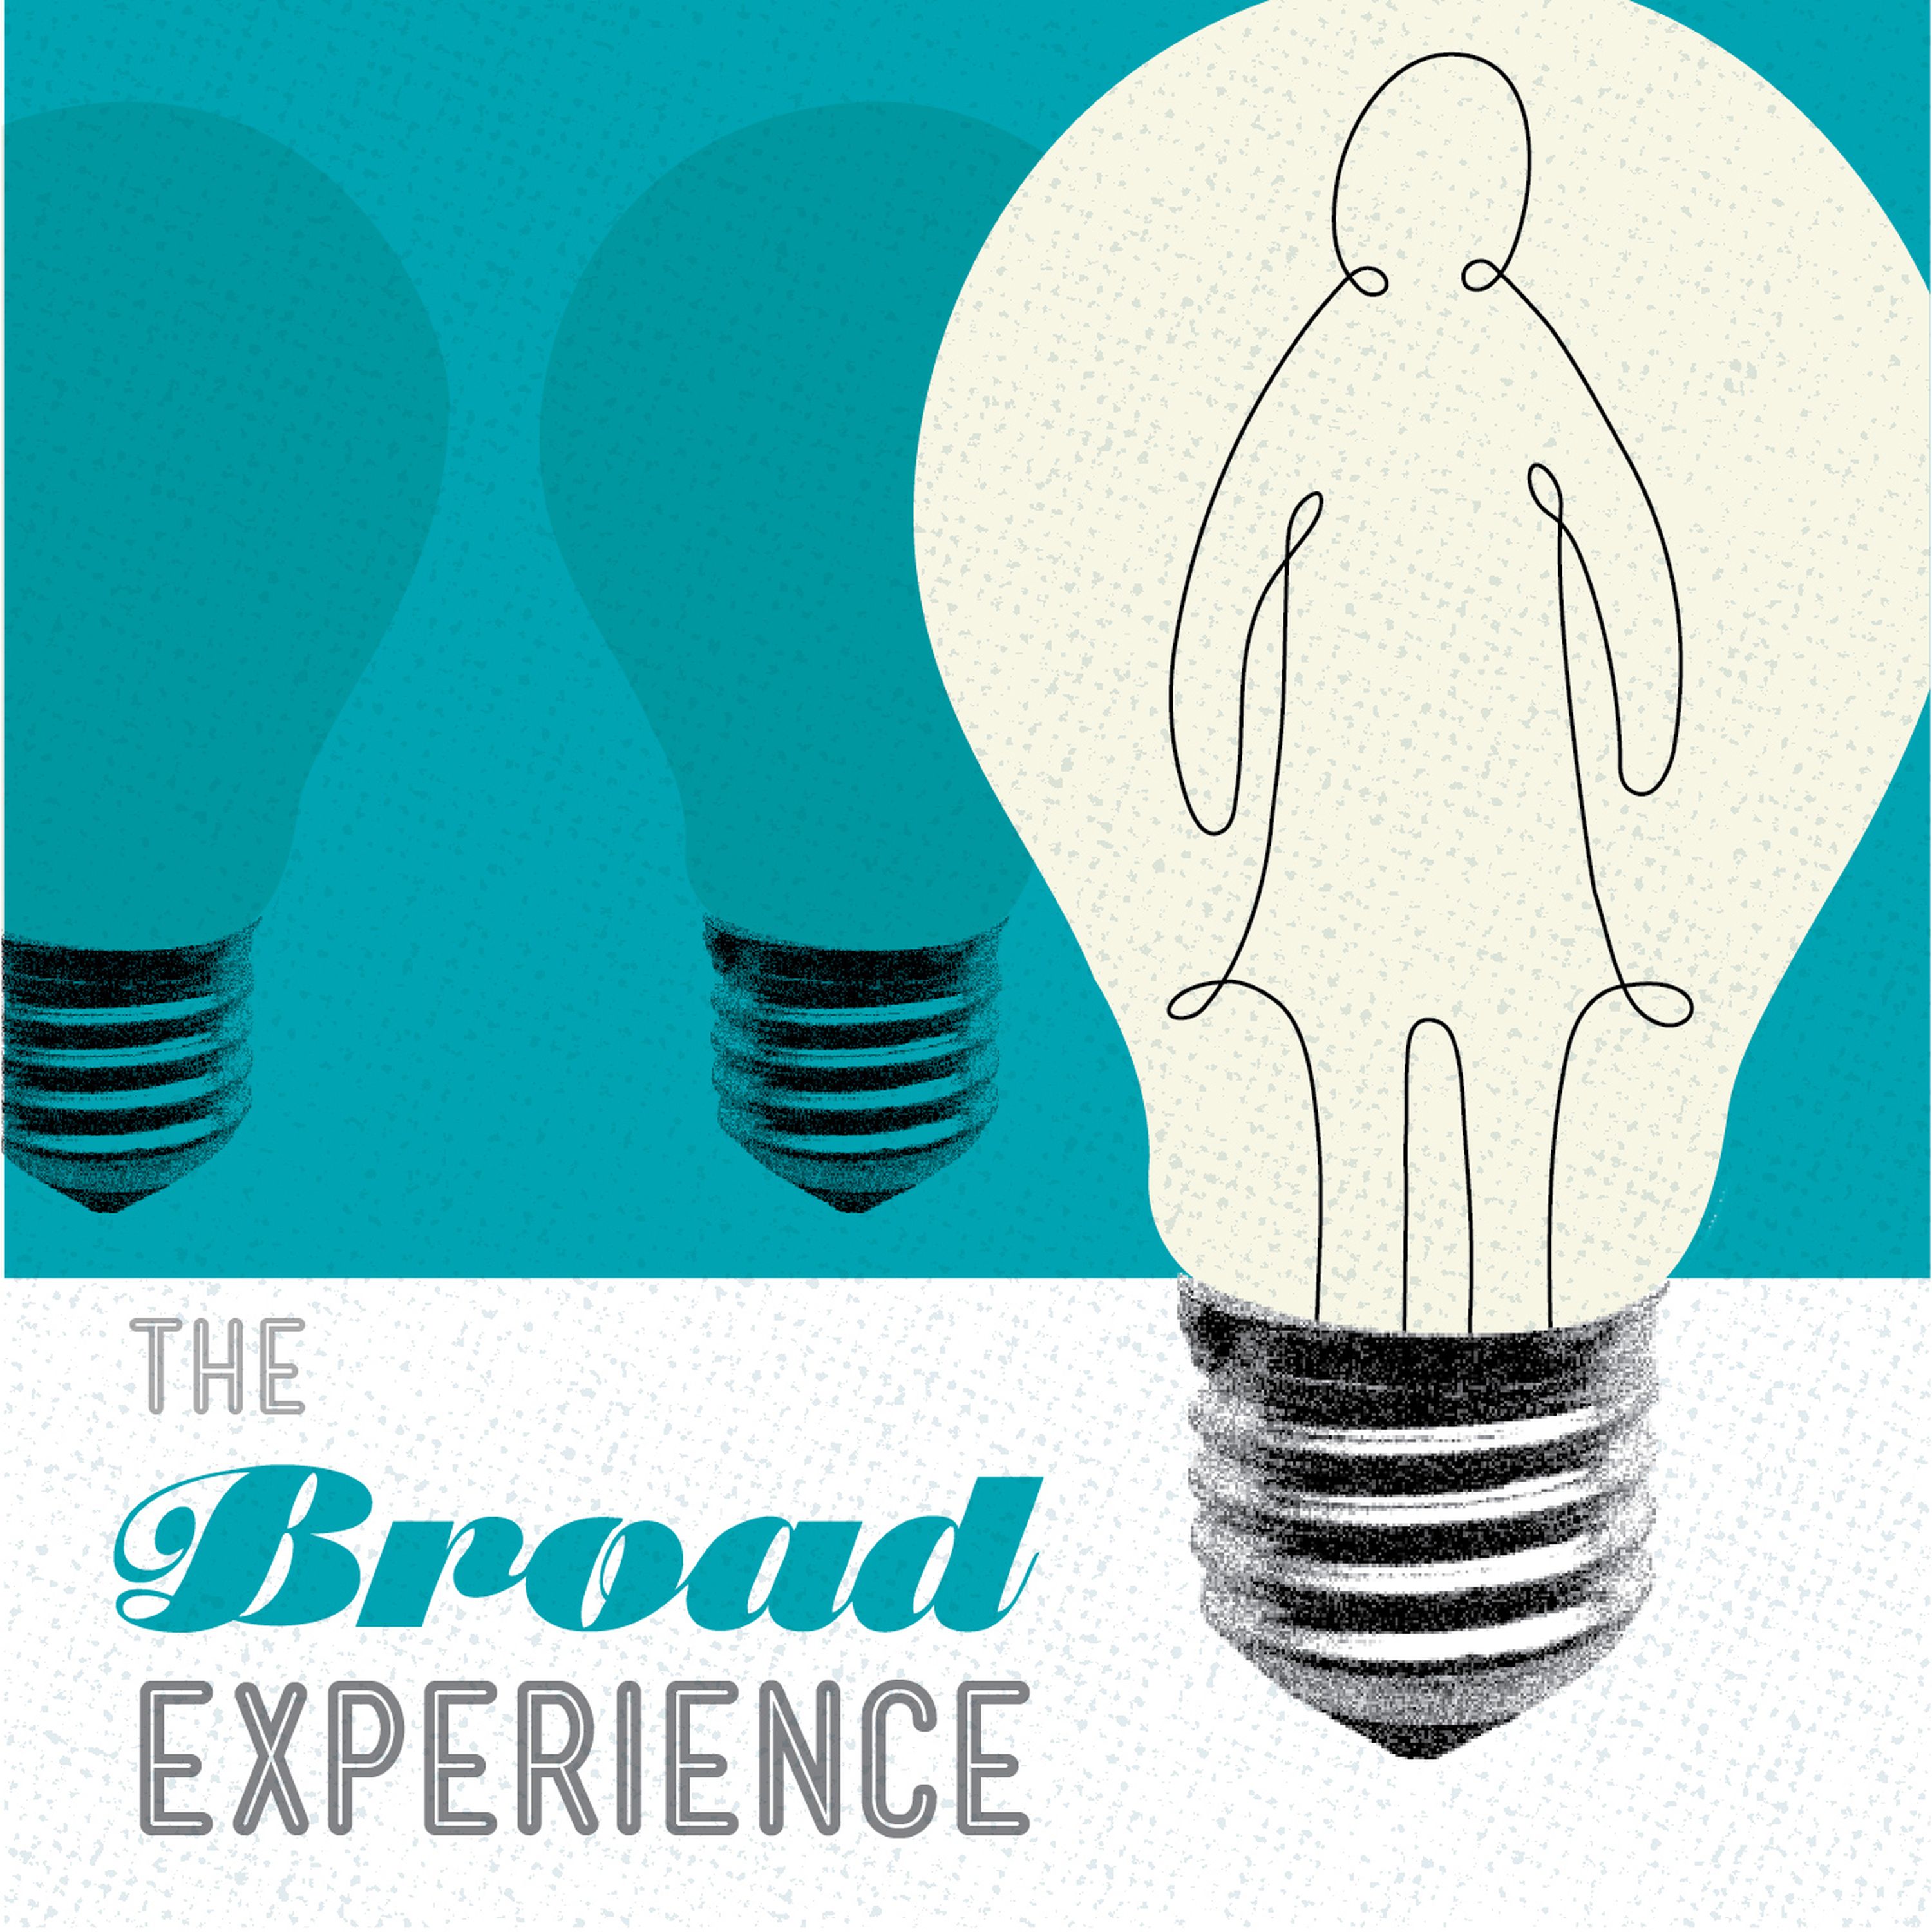 The Broad Experience 39: Daughters in Charge